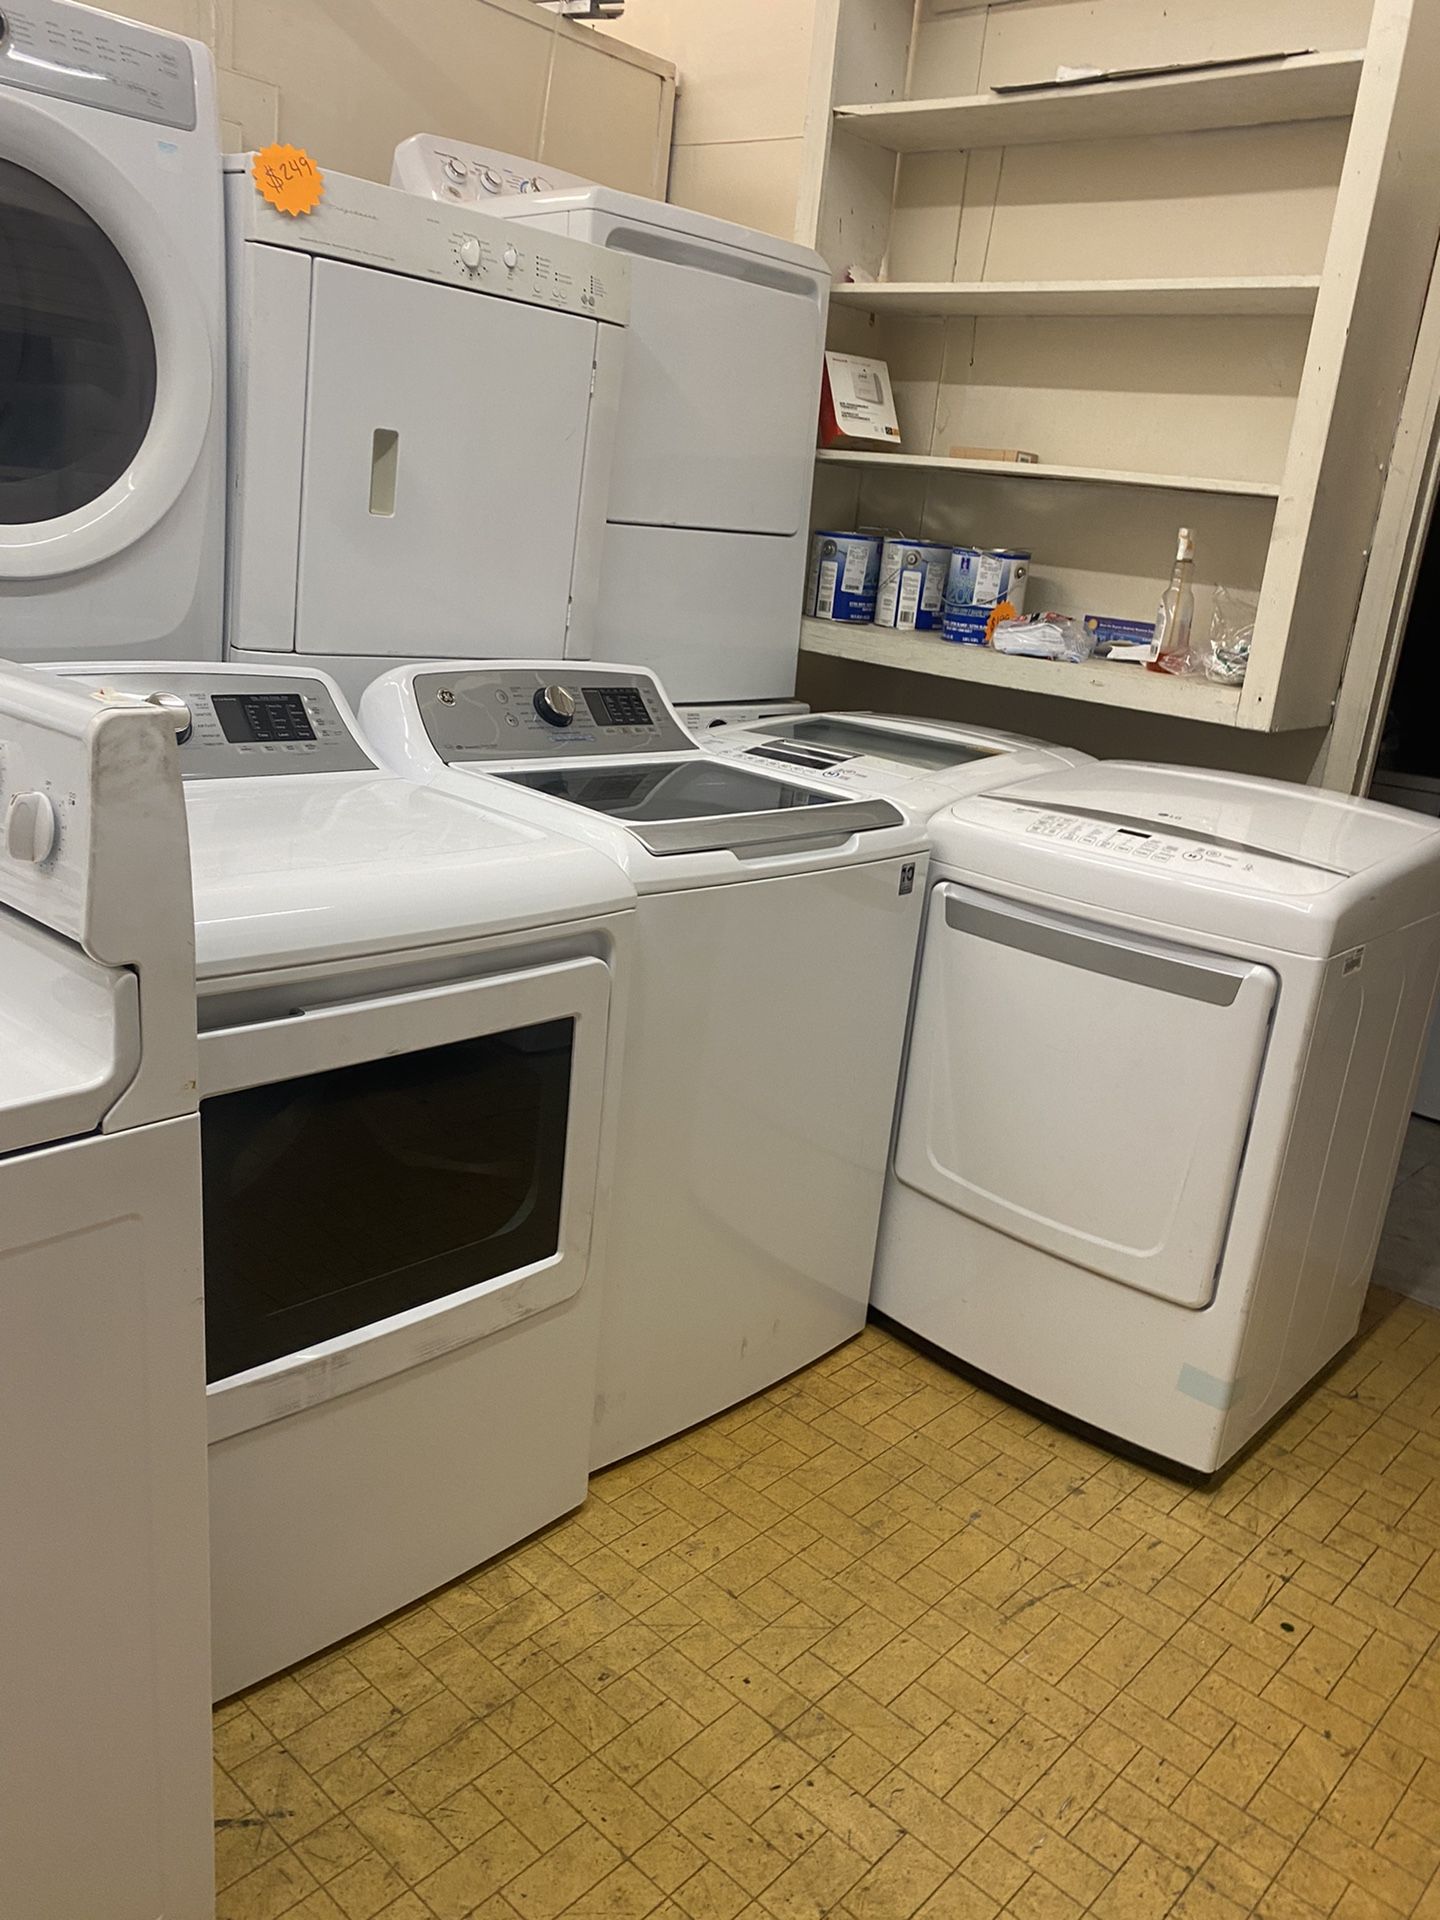 Washer Dryer Sale!! Starting @ $199 (Dryer) Delivery and install available for small fee 🚛